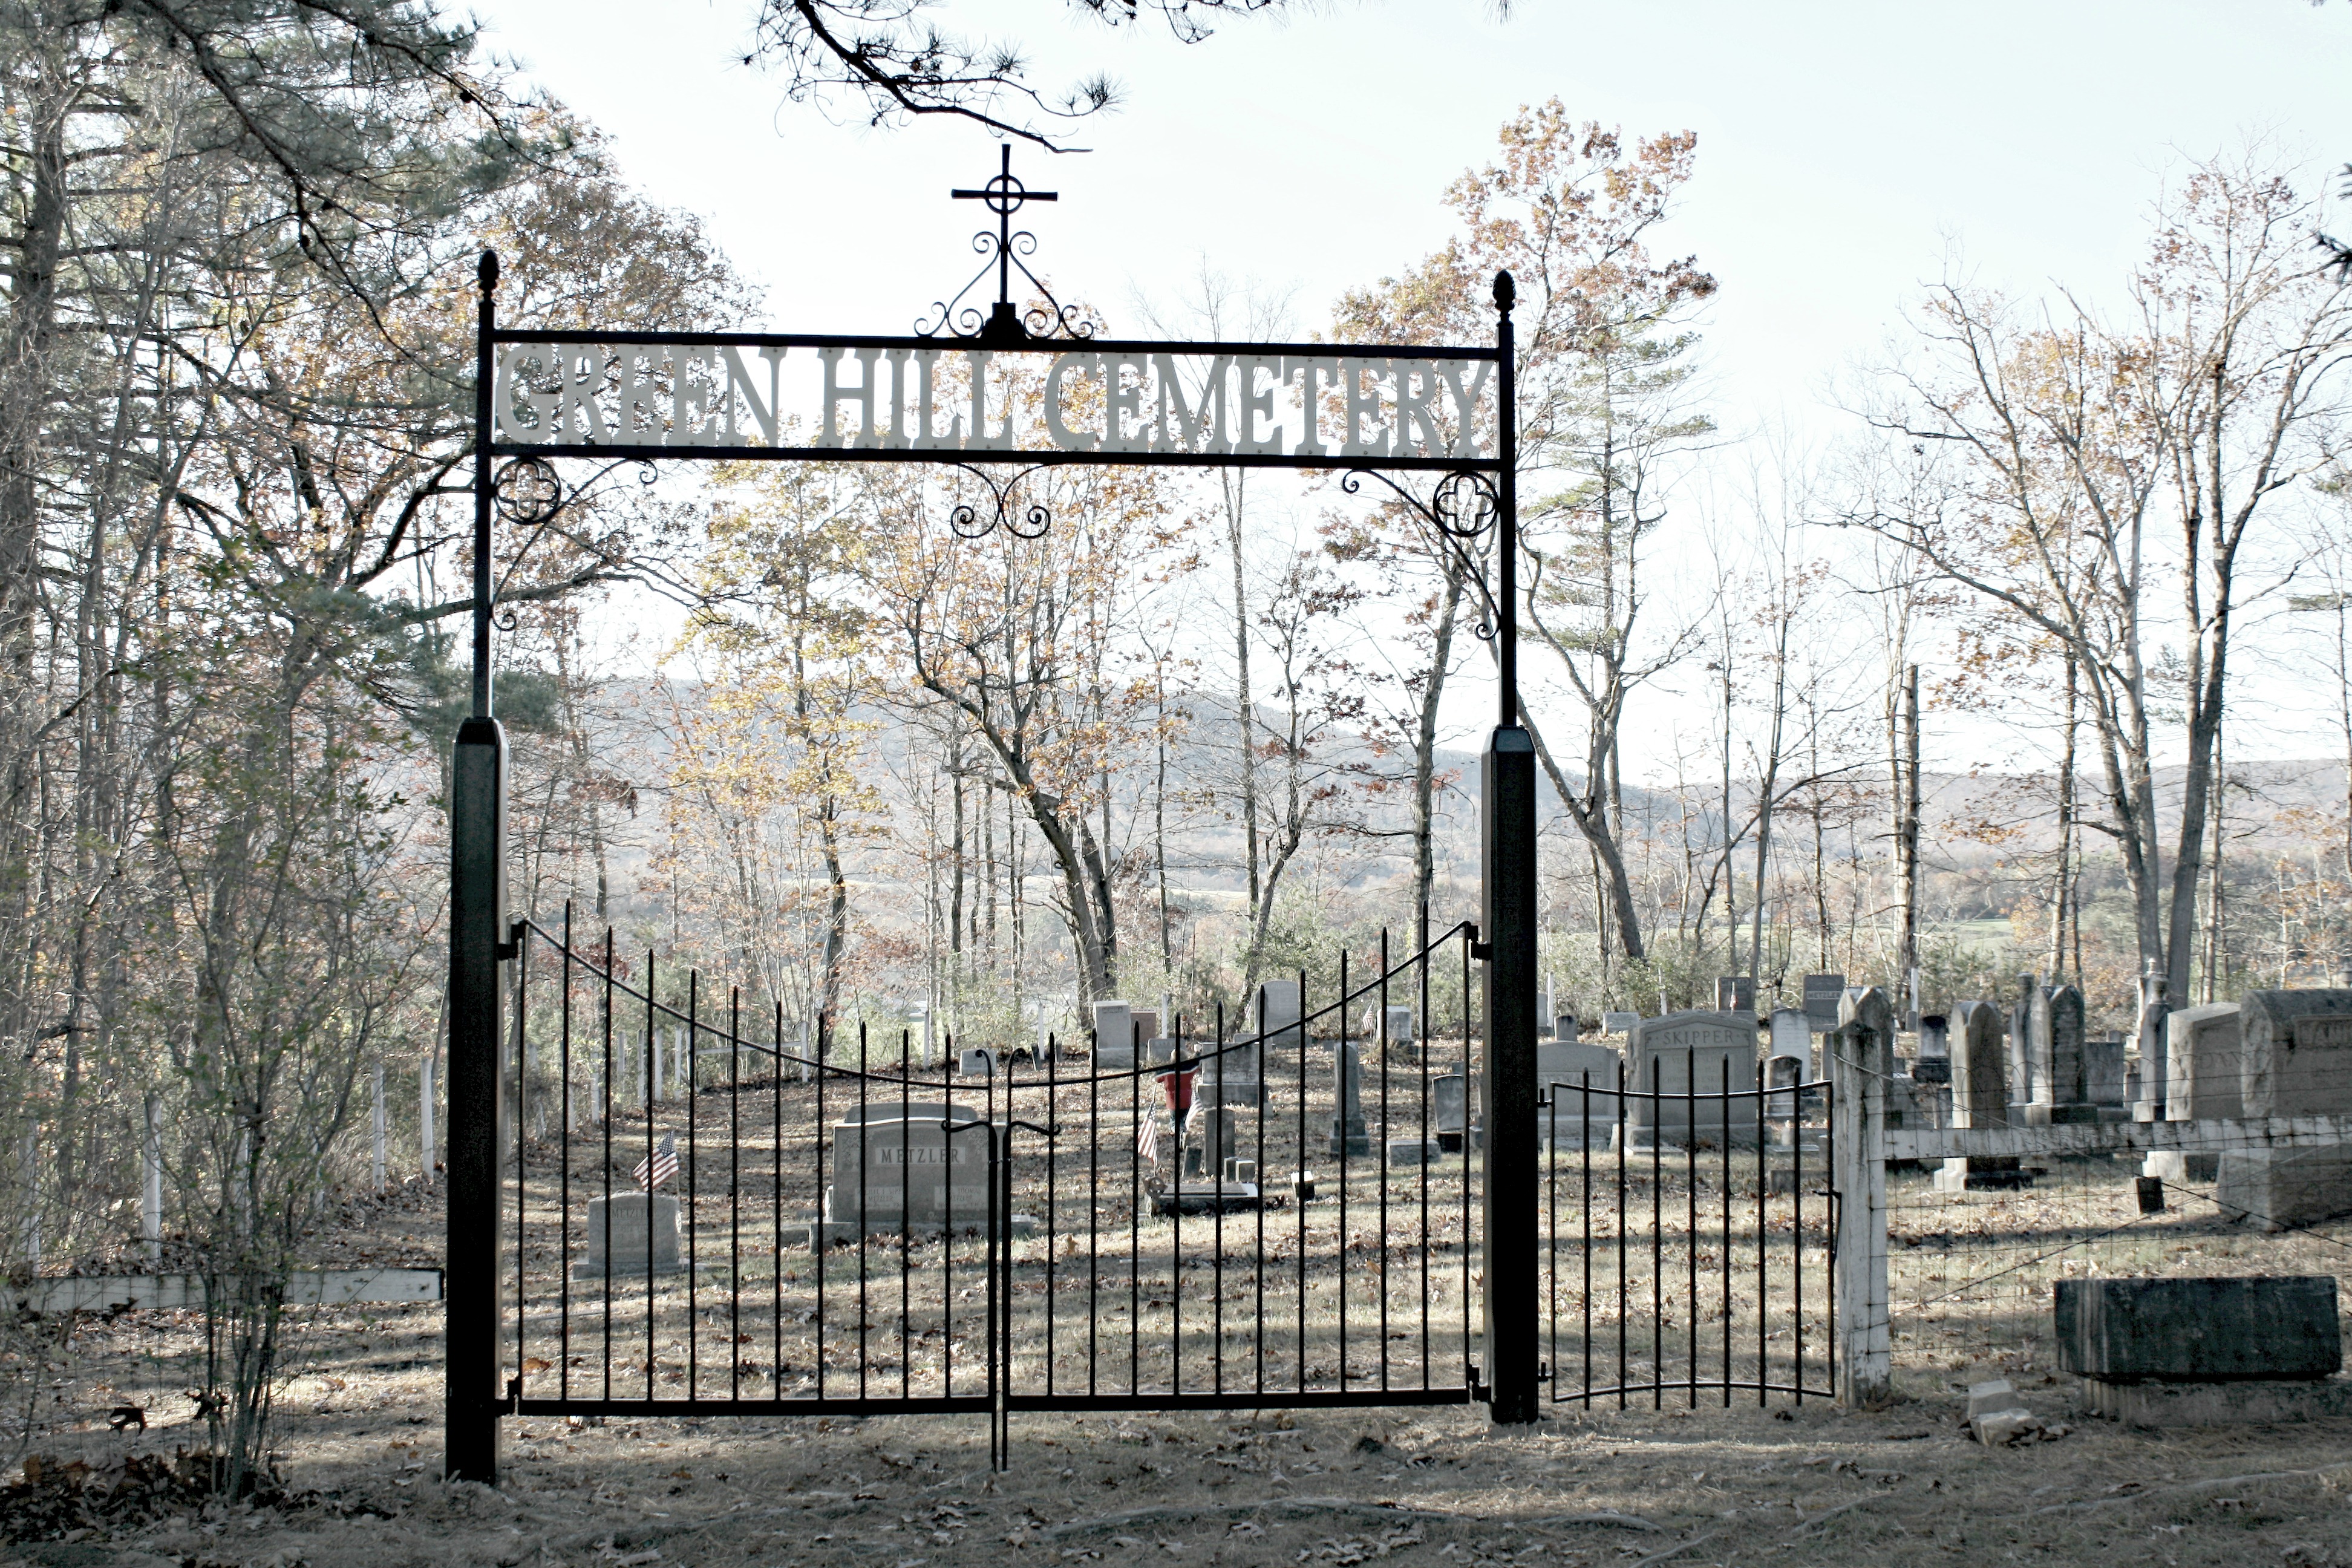 See this Cemetery Archway and Gate Restored - Antietam Iron Works